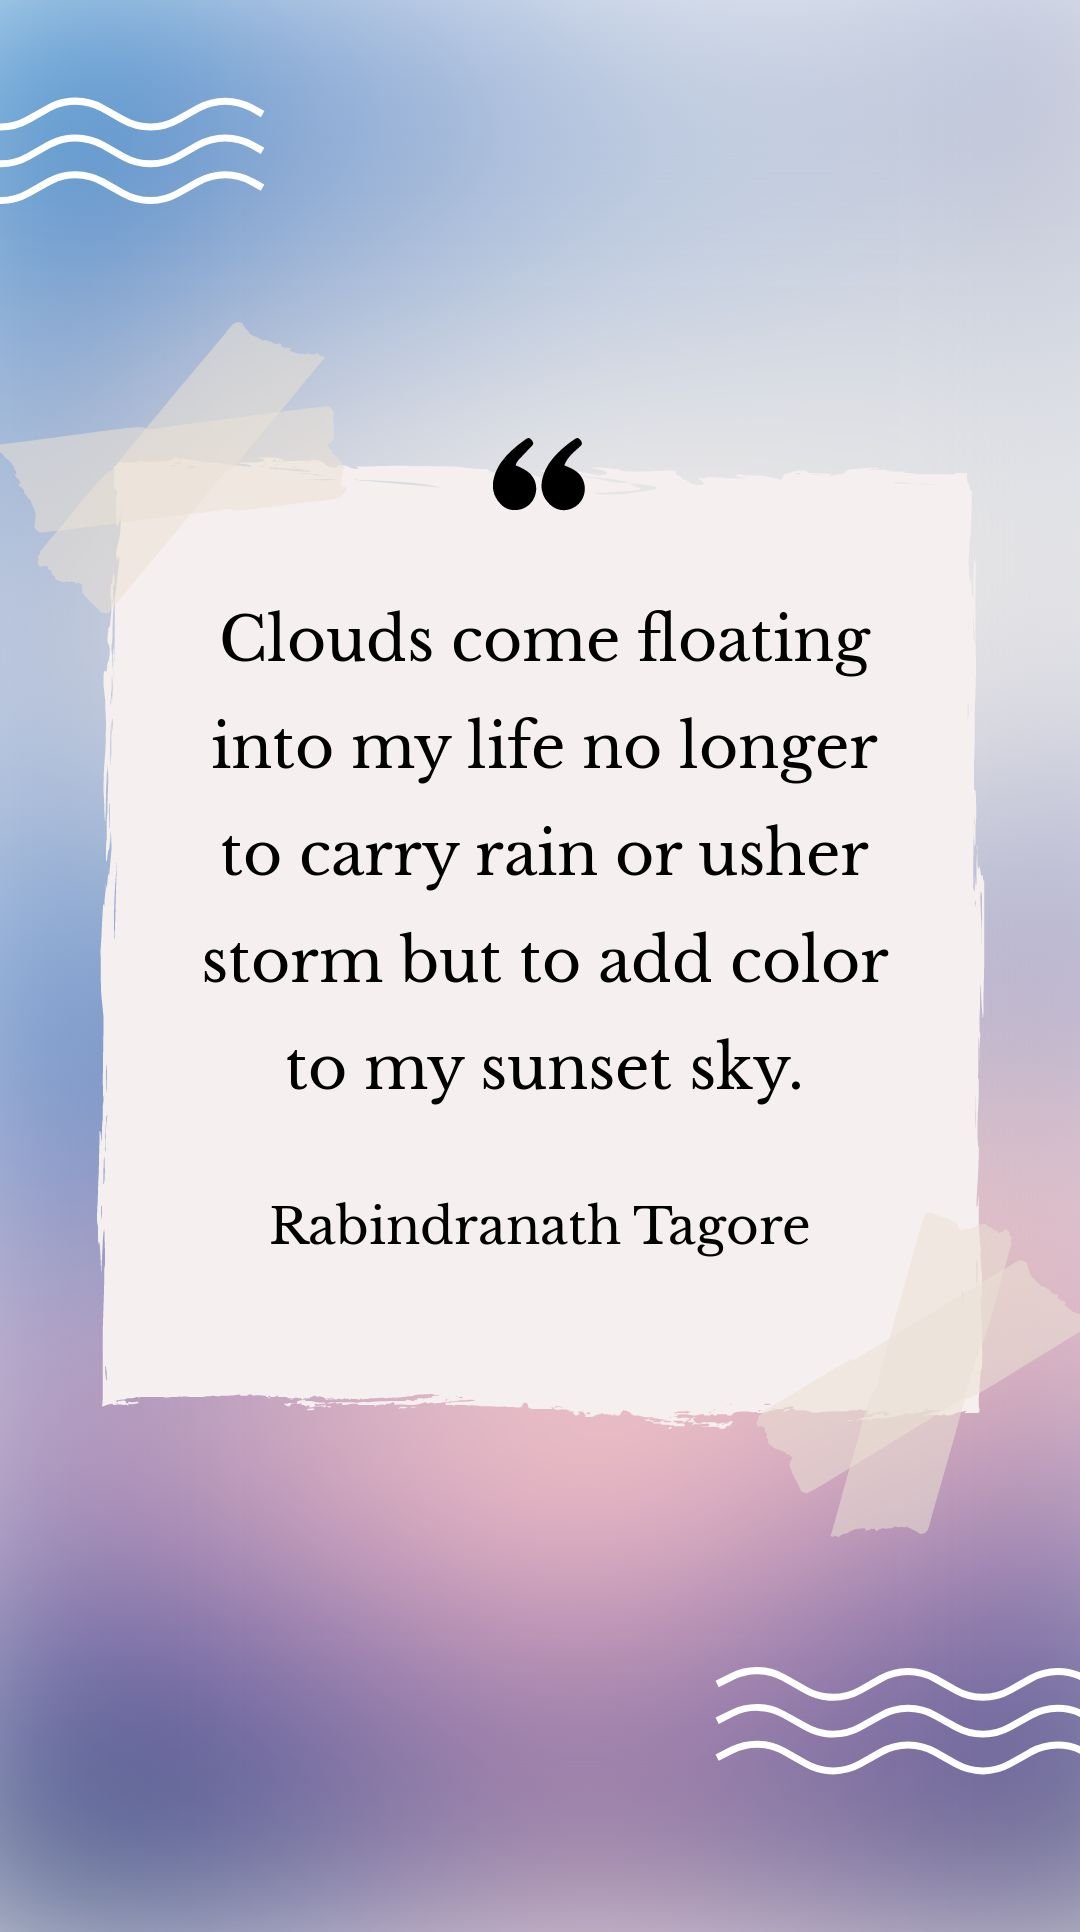 Rabindranath Tagore - Clouds come floating into my life no longer to carry rain or usher storm but to add color to my sunset sky.